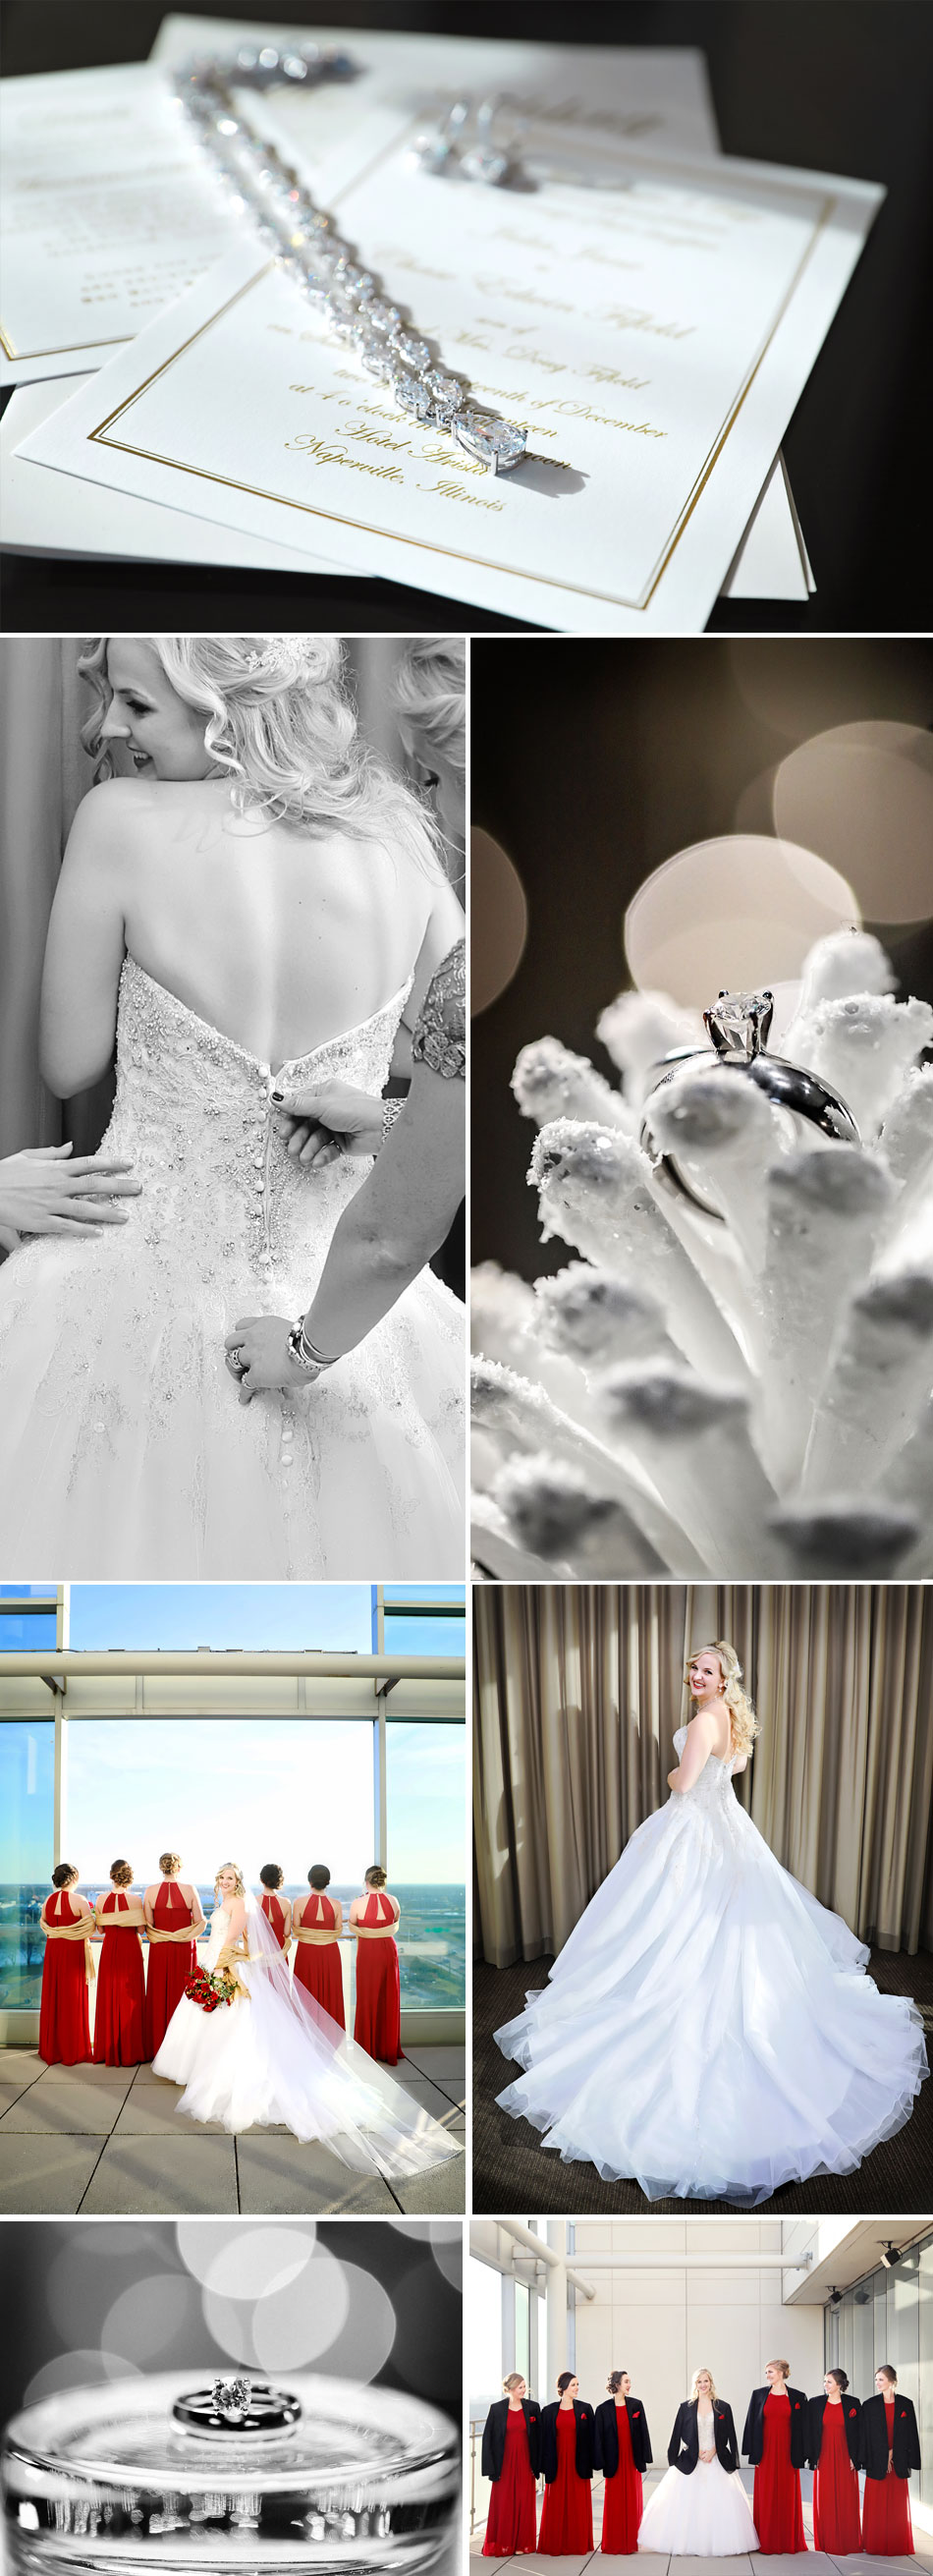 Beauty Power & Strength | Hotel Arista | Chicago Naperville Wedding Photographer | Alicia's Photography